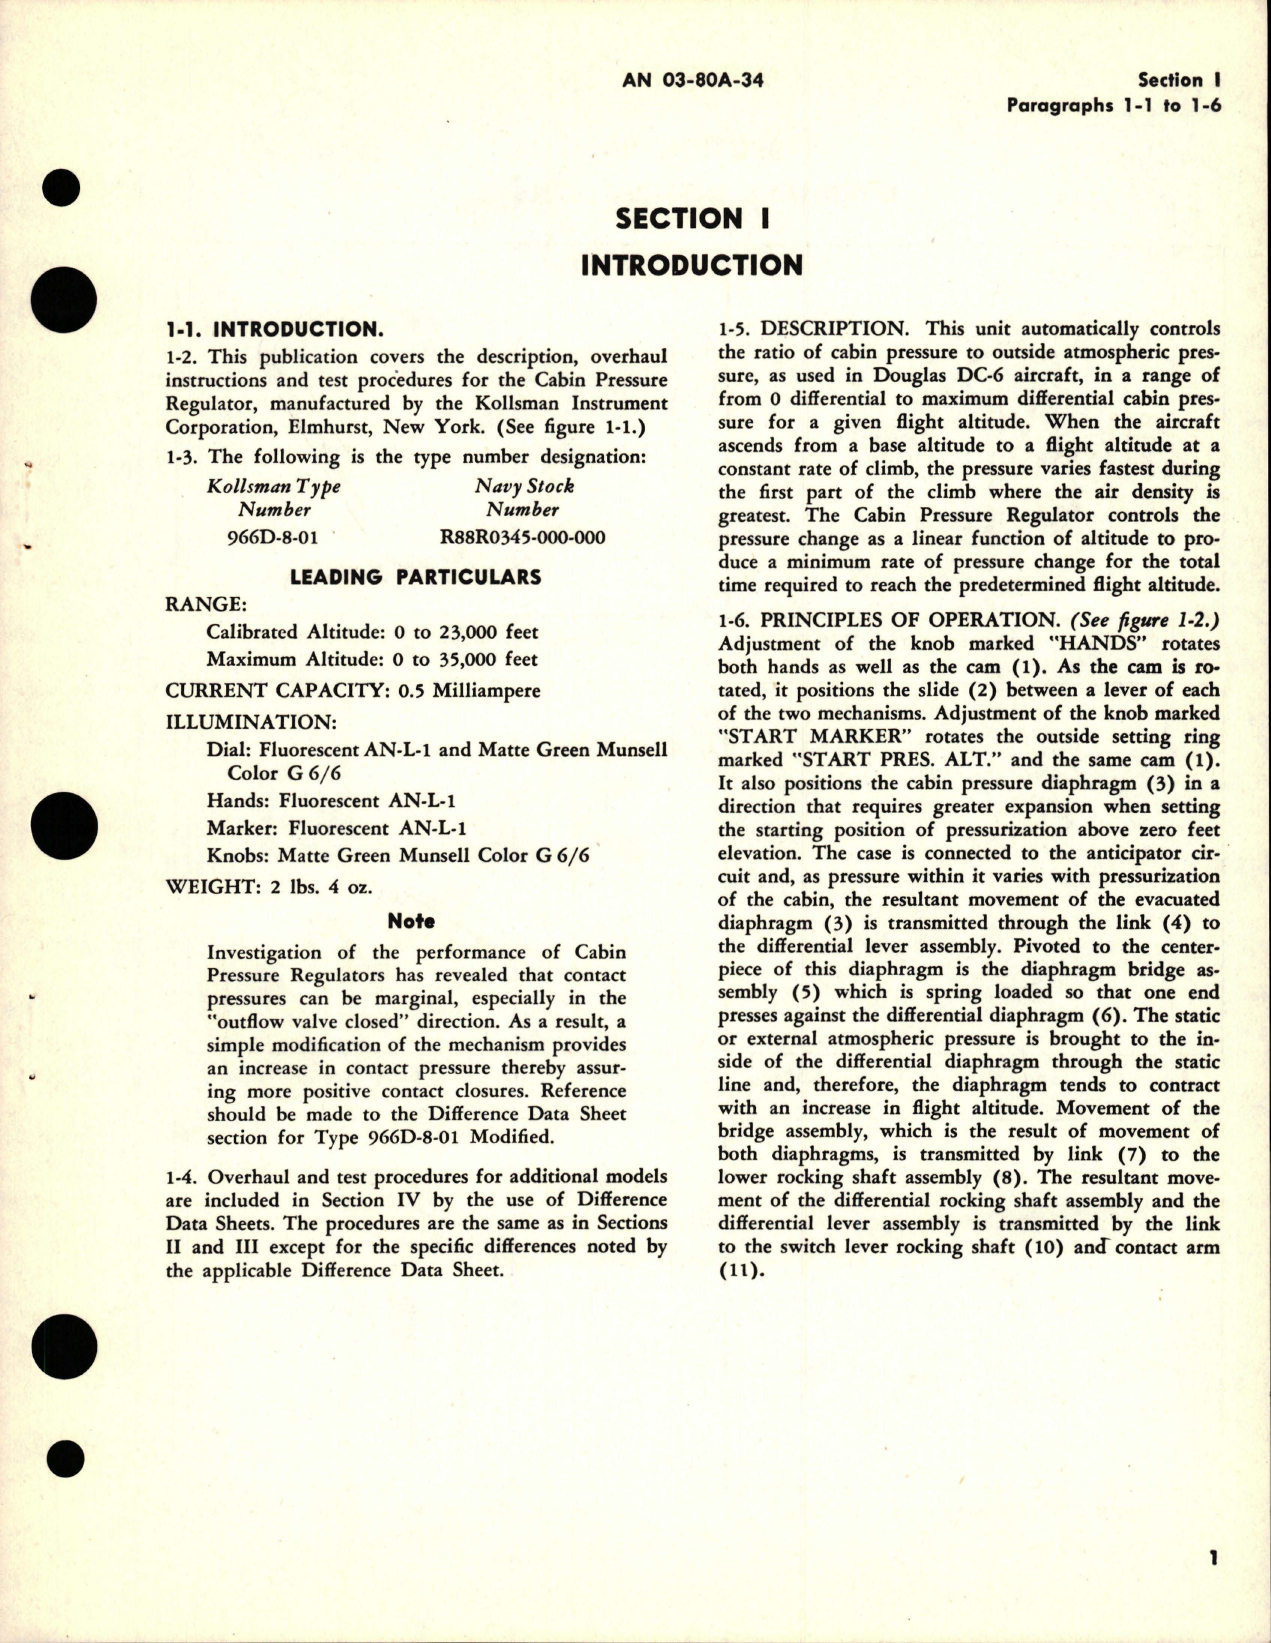 Sample page 5 from AirCorps Library document: Overhaul Instructions for Cabin Pressure Regulator 